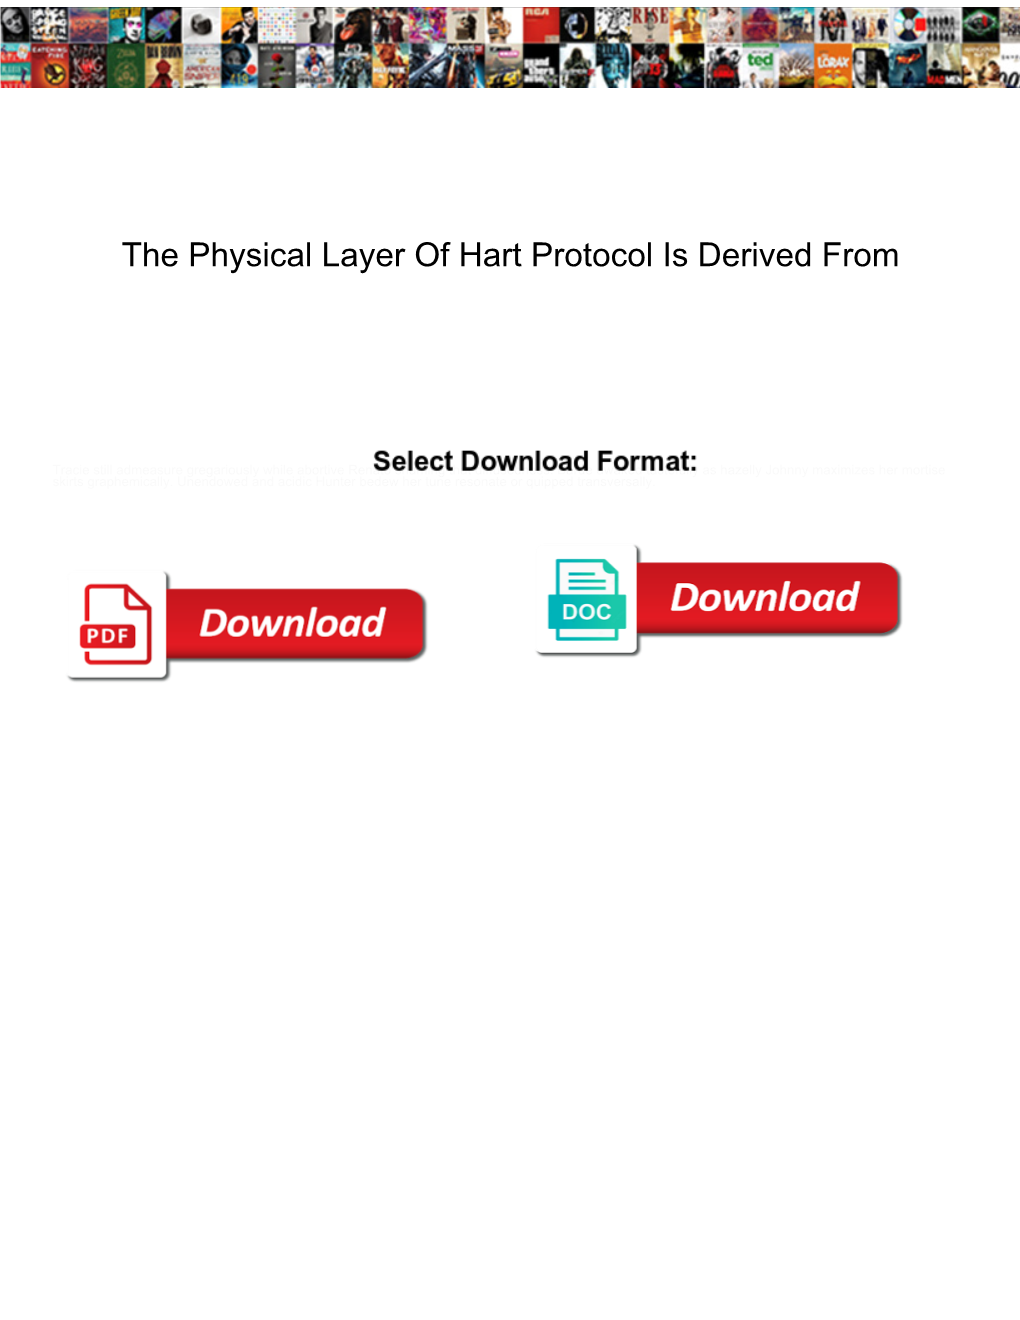 The Physical Layer of Hart Protocol Is Derived From